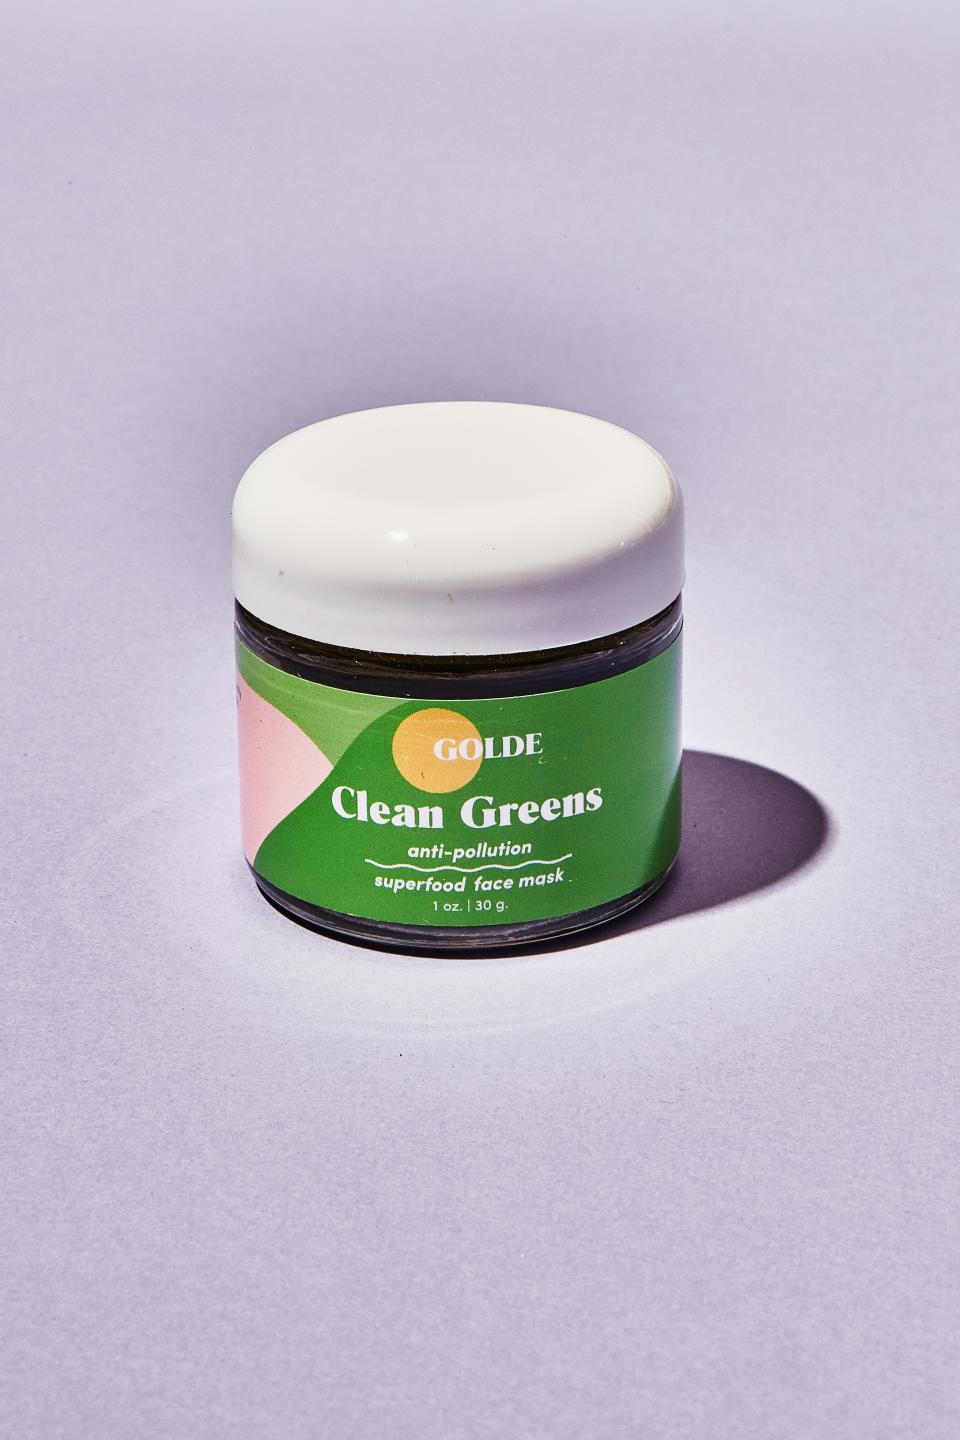 Golde Clean Greens Anti-Pollution Face Mask :